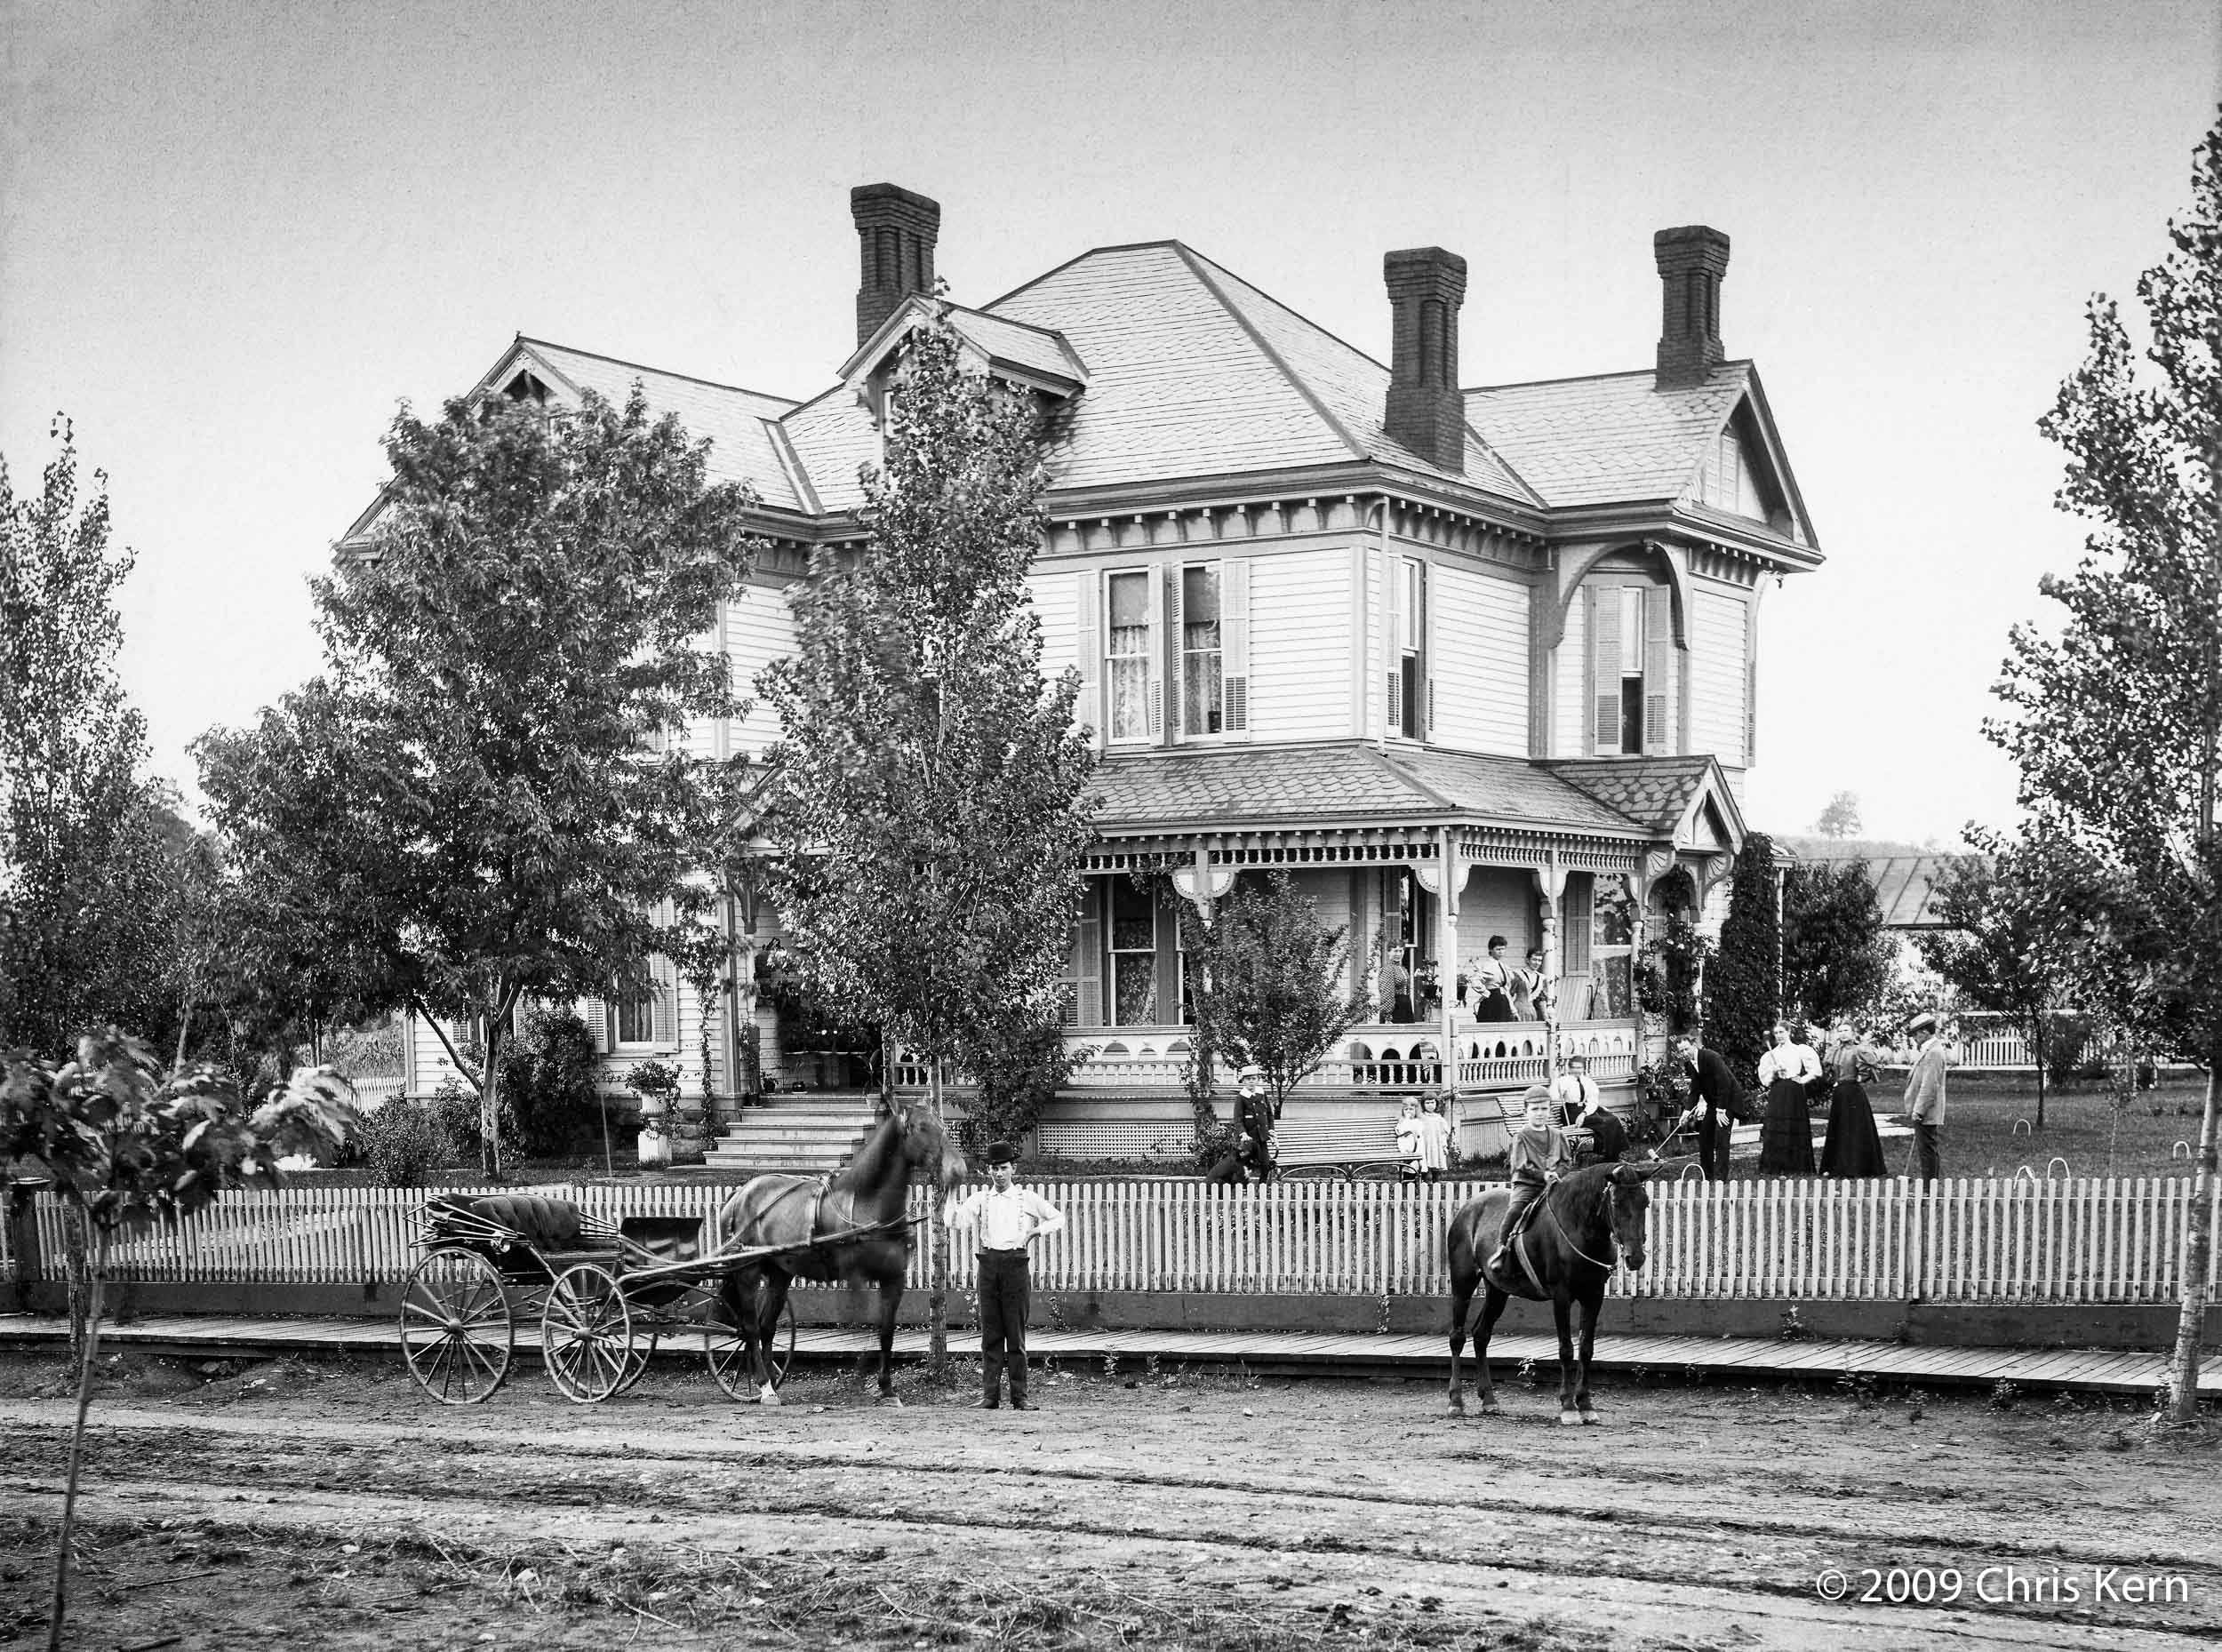 My mother referred to the house where her mother grew up as "the old Woodsfield House."  This photo dates from 1895.  The structure still stands (in slightly altered form) at 224 Eastern Ave., Woodsfield, Ohio — although I suspect the street number had not been assigned when the picture was taken.  It was known then, and apparently still is, at least among older residents of Woodsfield, as "the Mallory house."

The little blond girl standing in front of the porch and sucking her thumb is my maternal grandmother, Gertrude Mallory Messner (1892-1975).  The dapper croquet player in the hat is my great-grandfather, Wickliffe Ewing Mallory (1852-1911), a successful lawyer who built the house and went by his initials, "W.E." View full size.